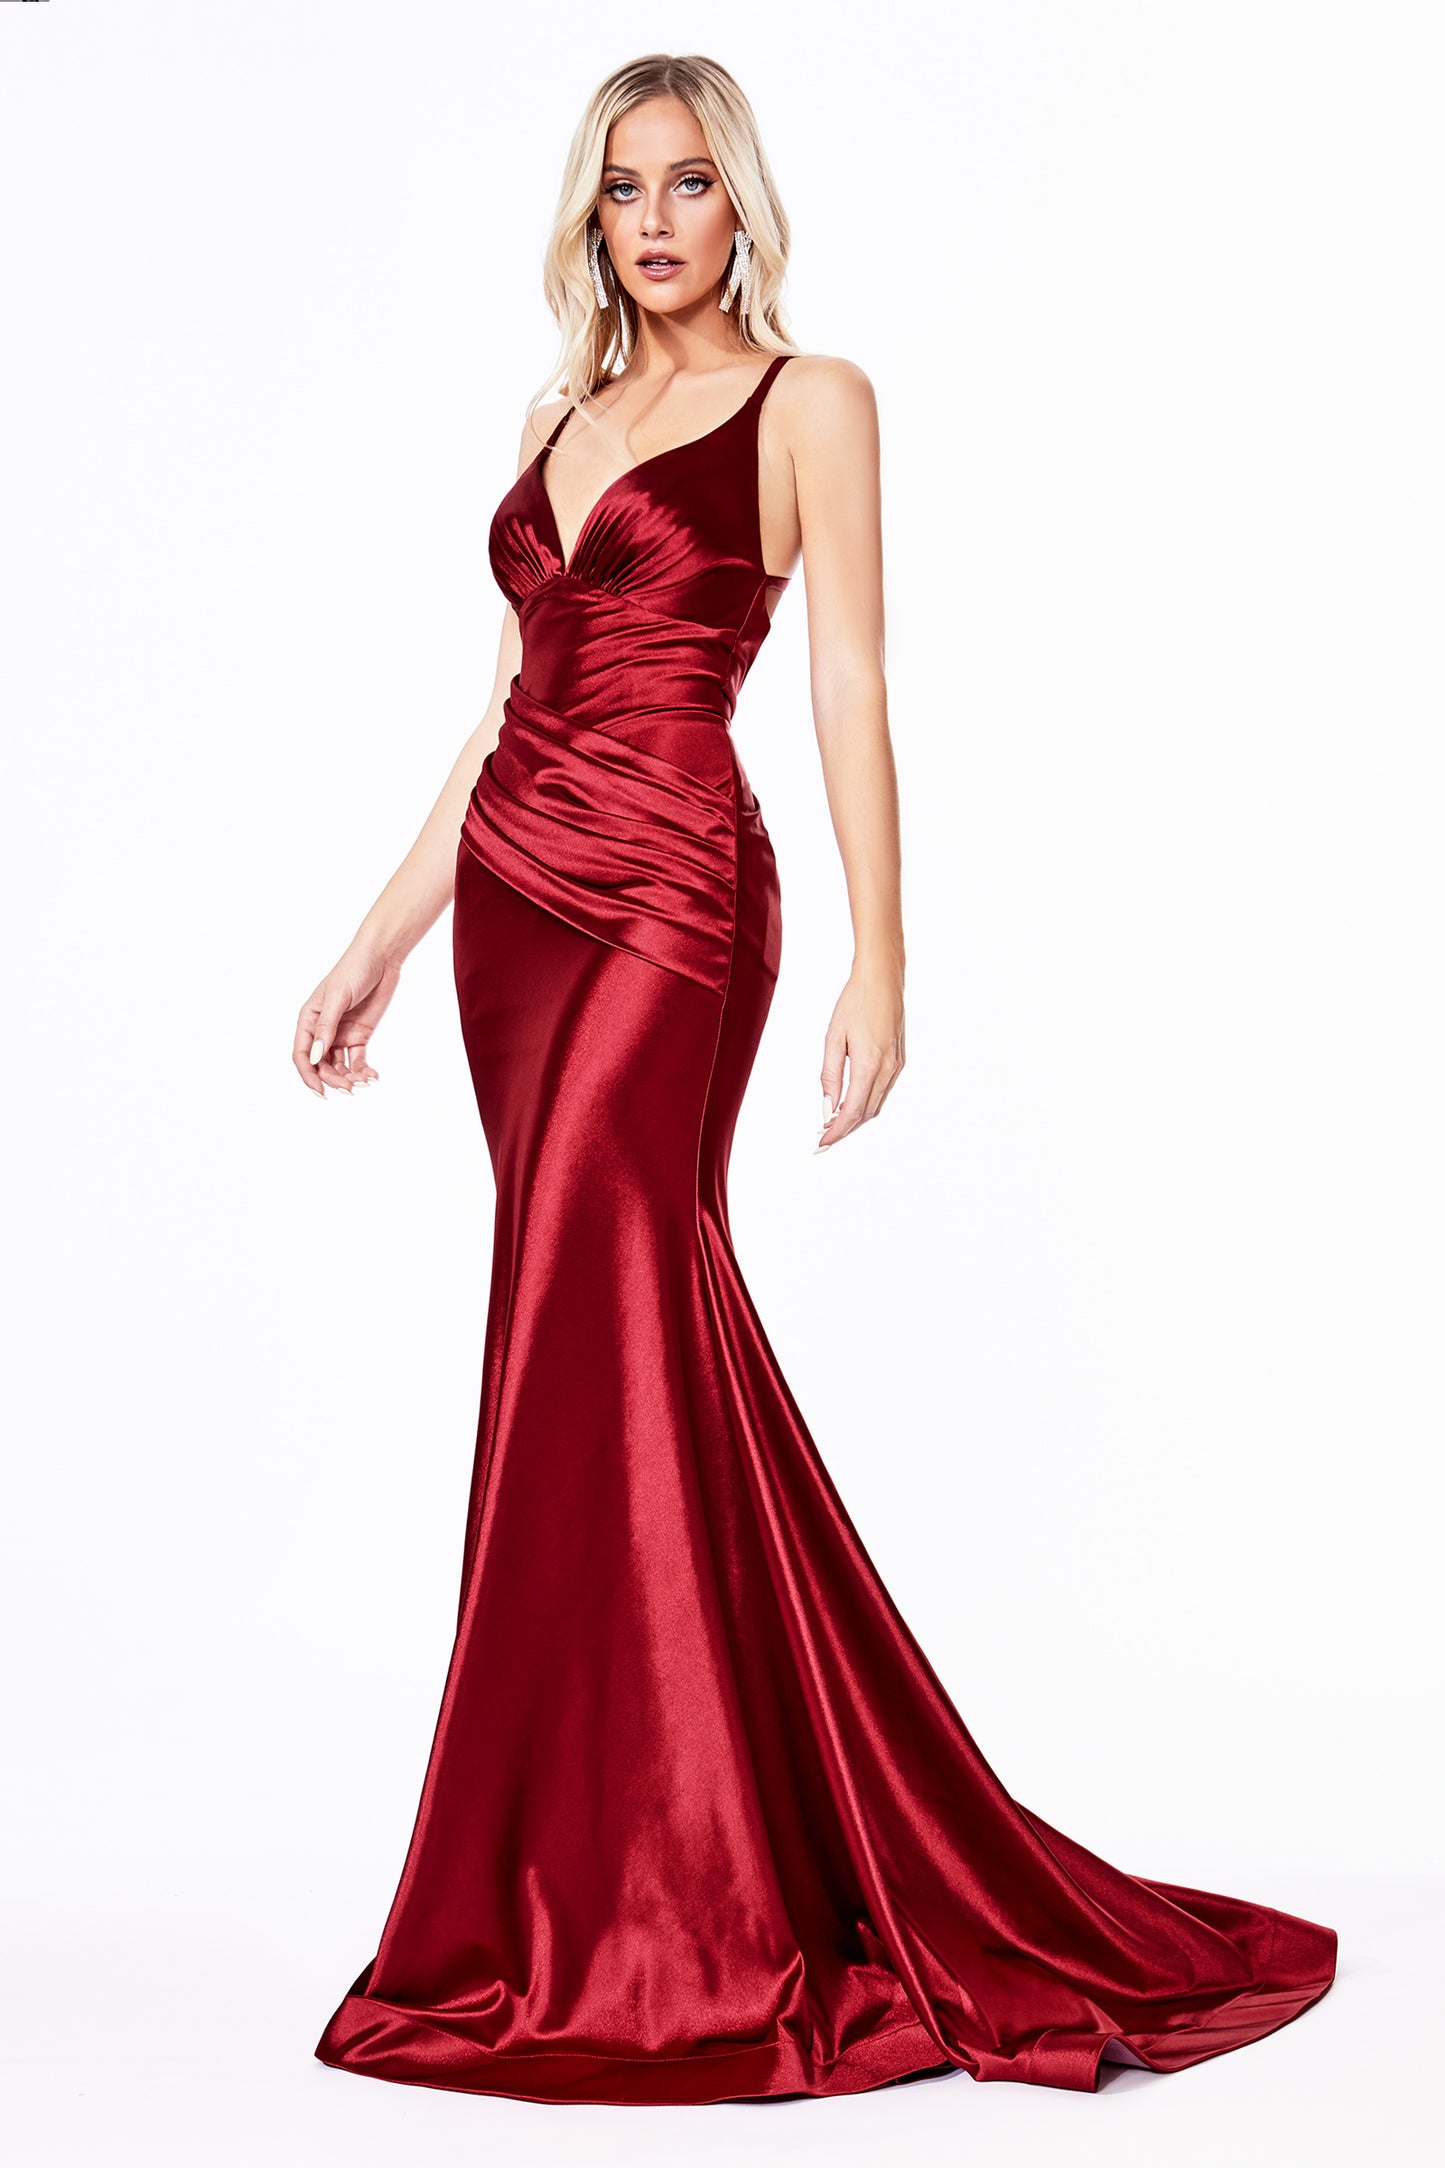 Stretch Satin Open Back Mermaid Gown with Gathered Waistband